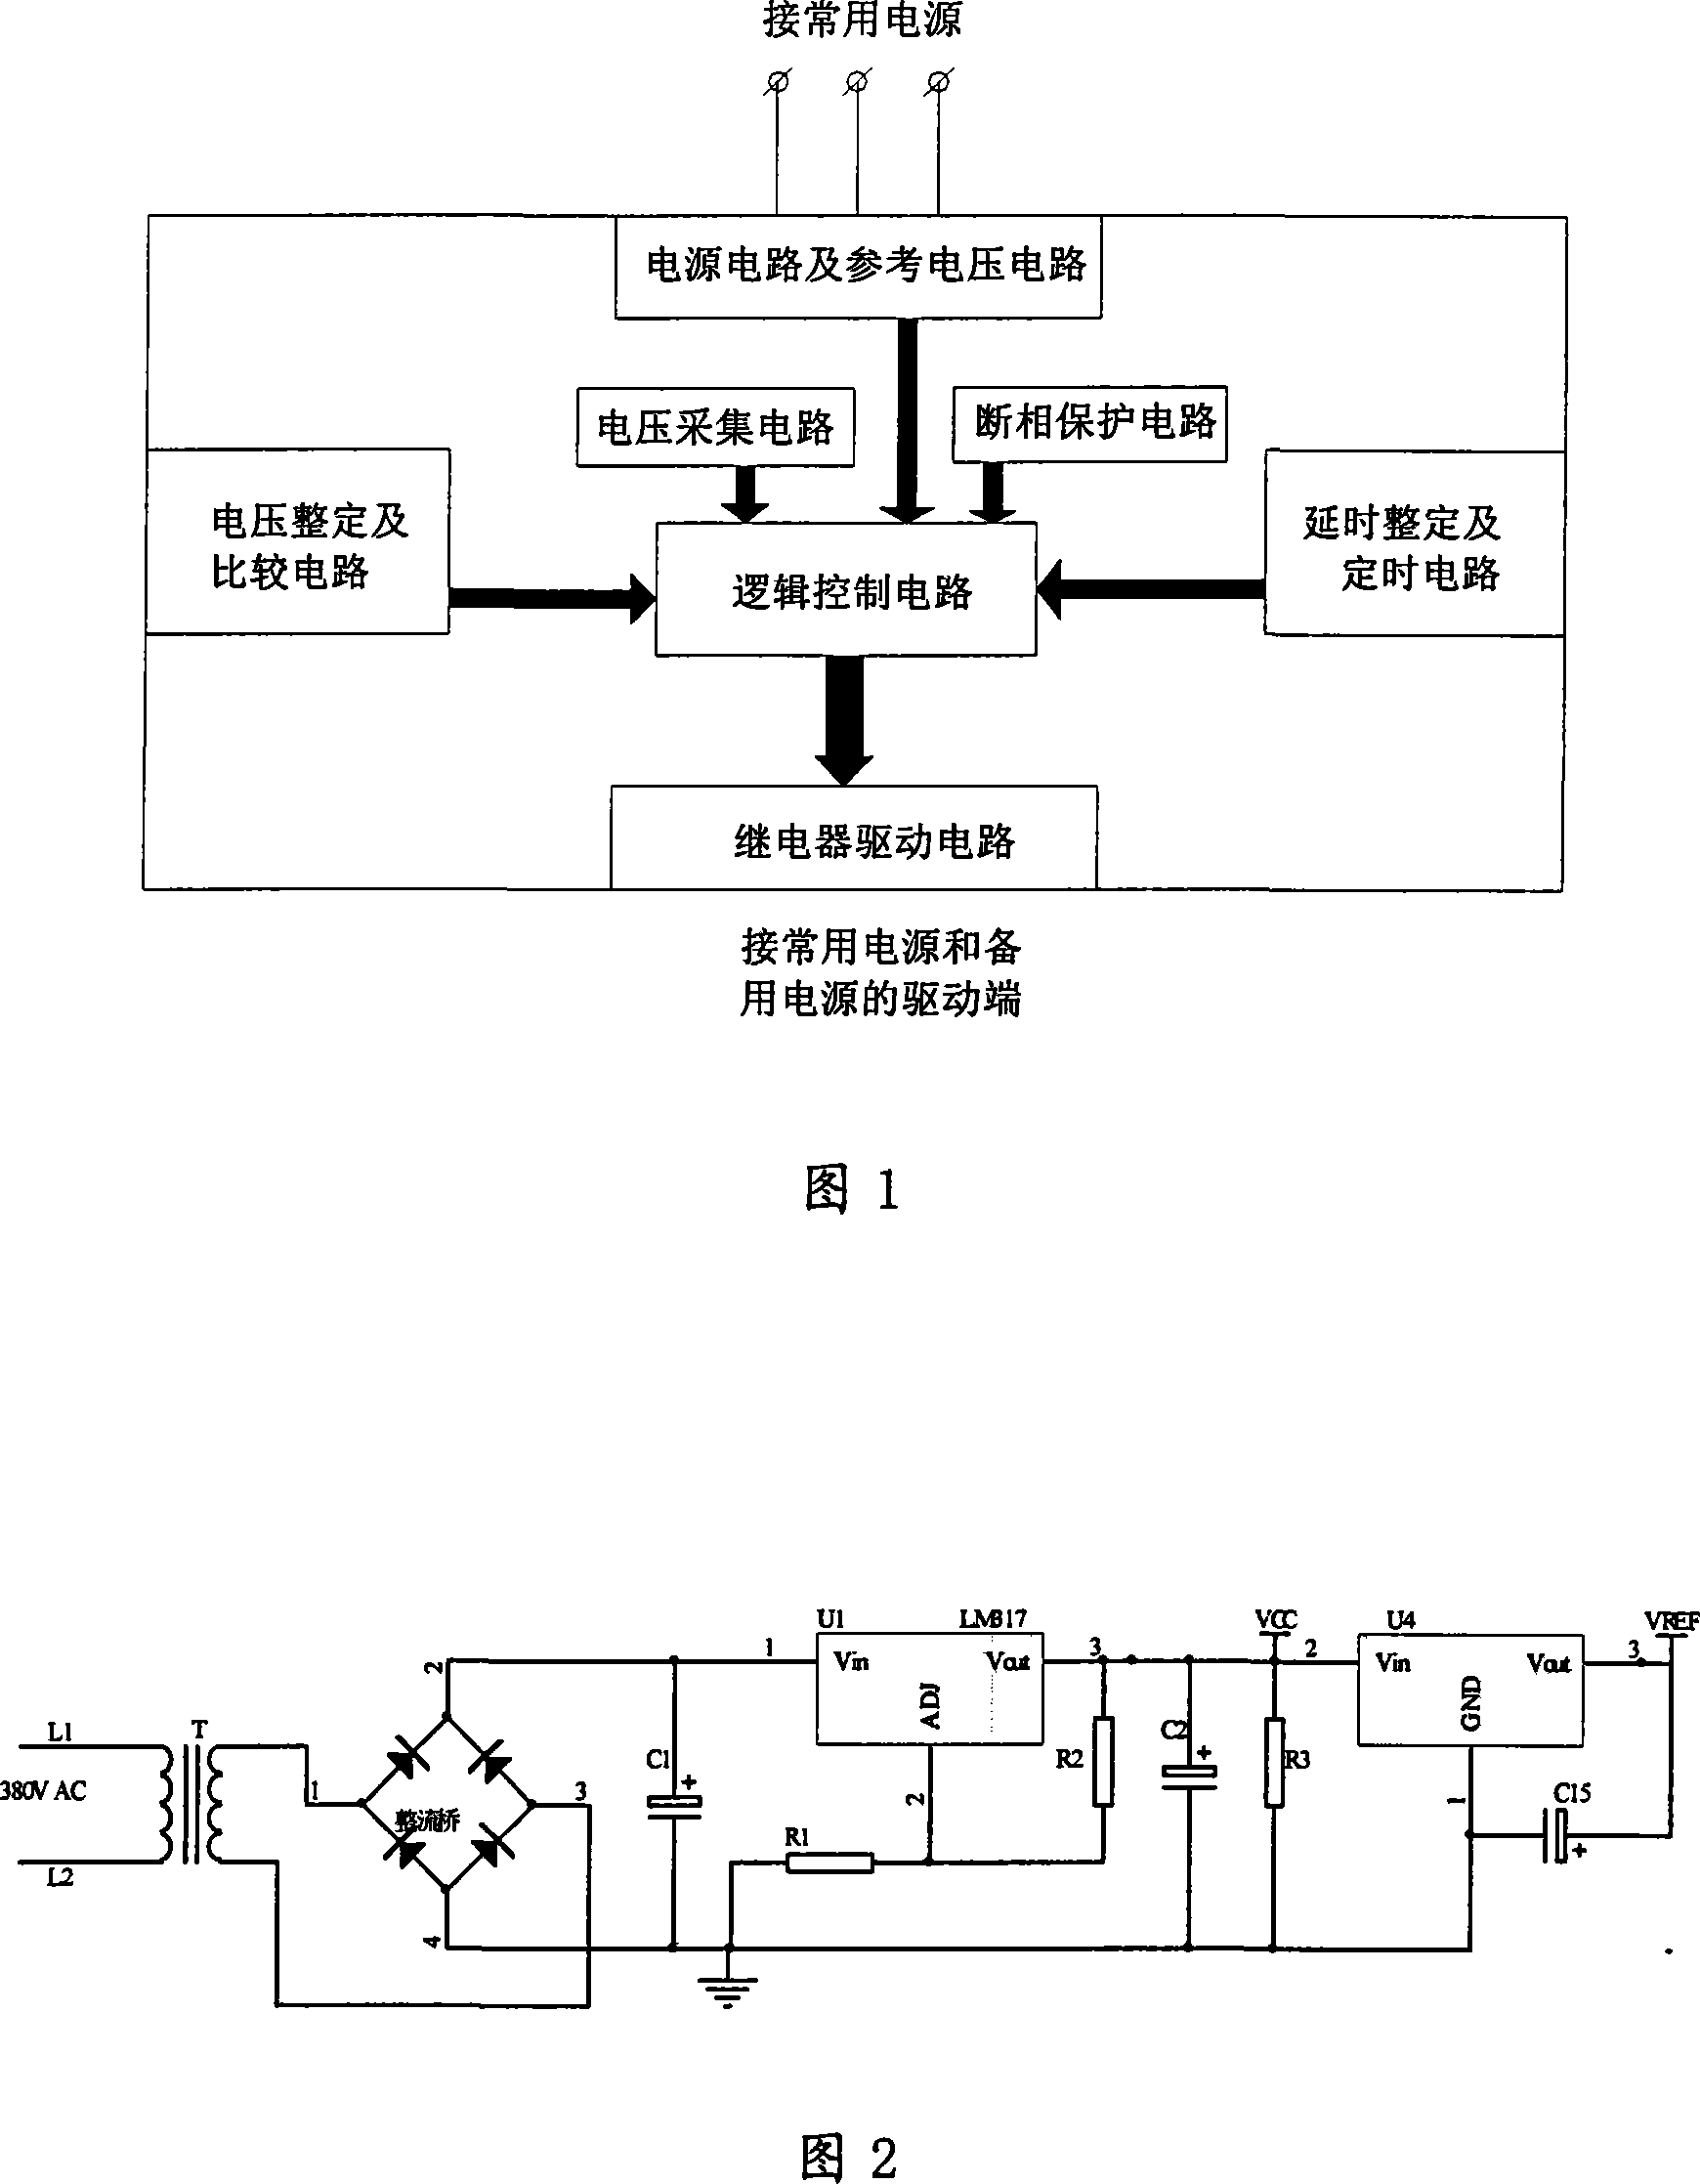 Control device of duplicate supply attent-unattent switch